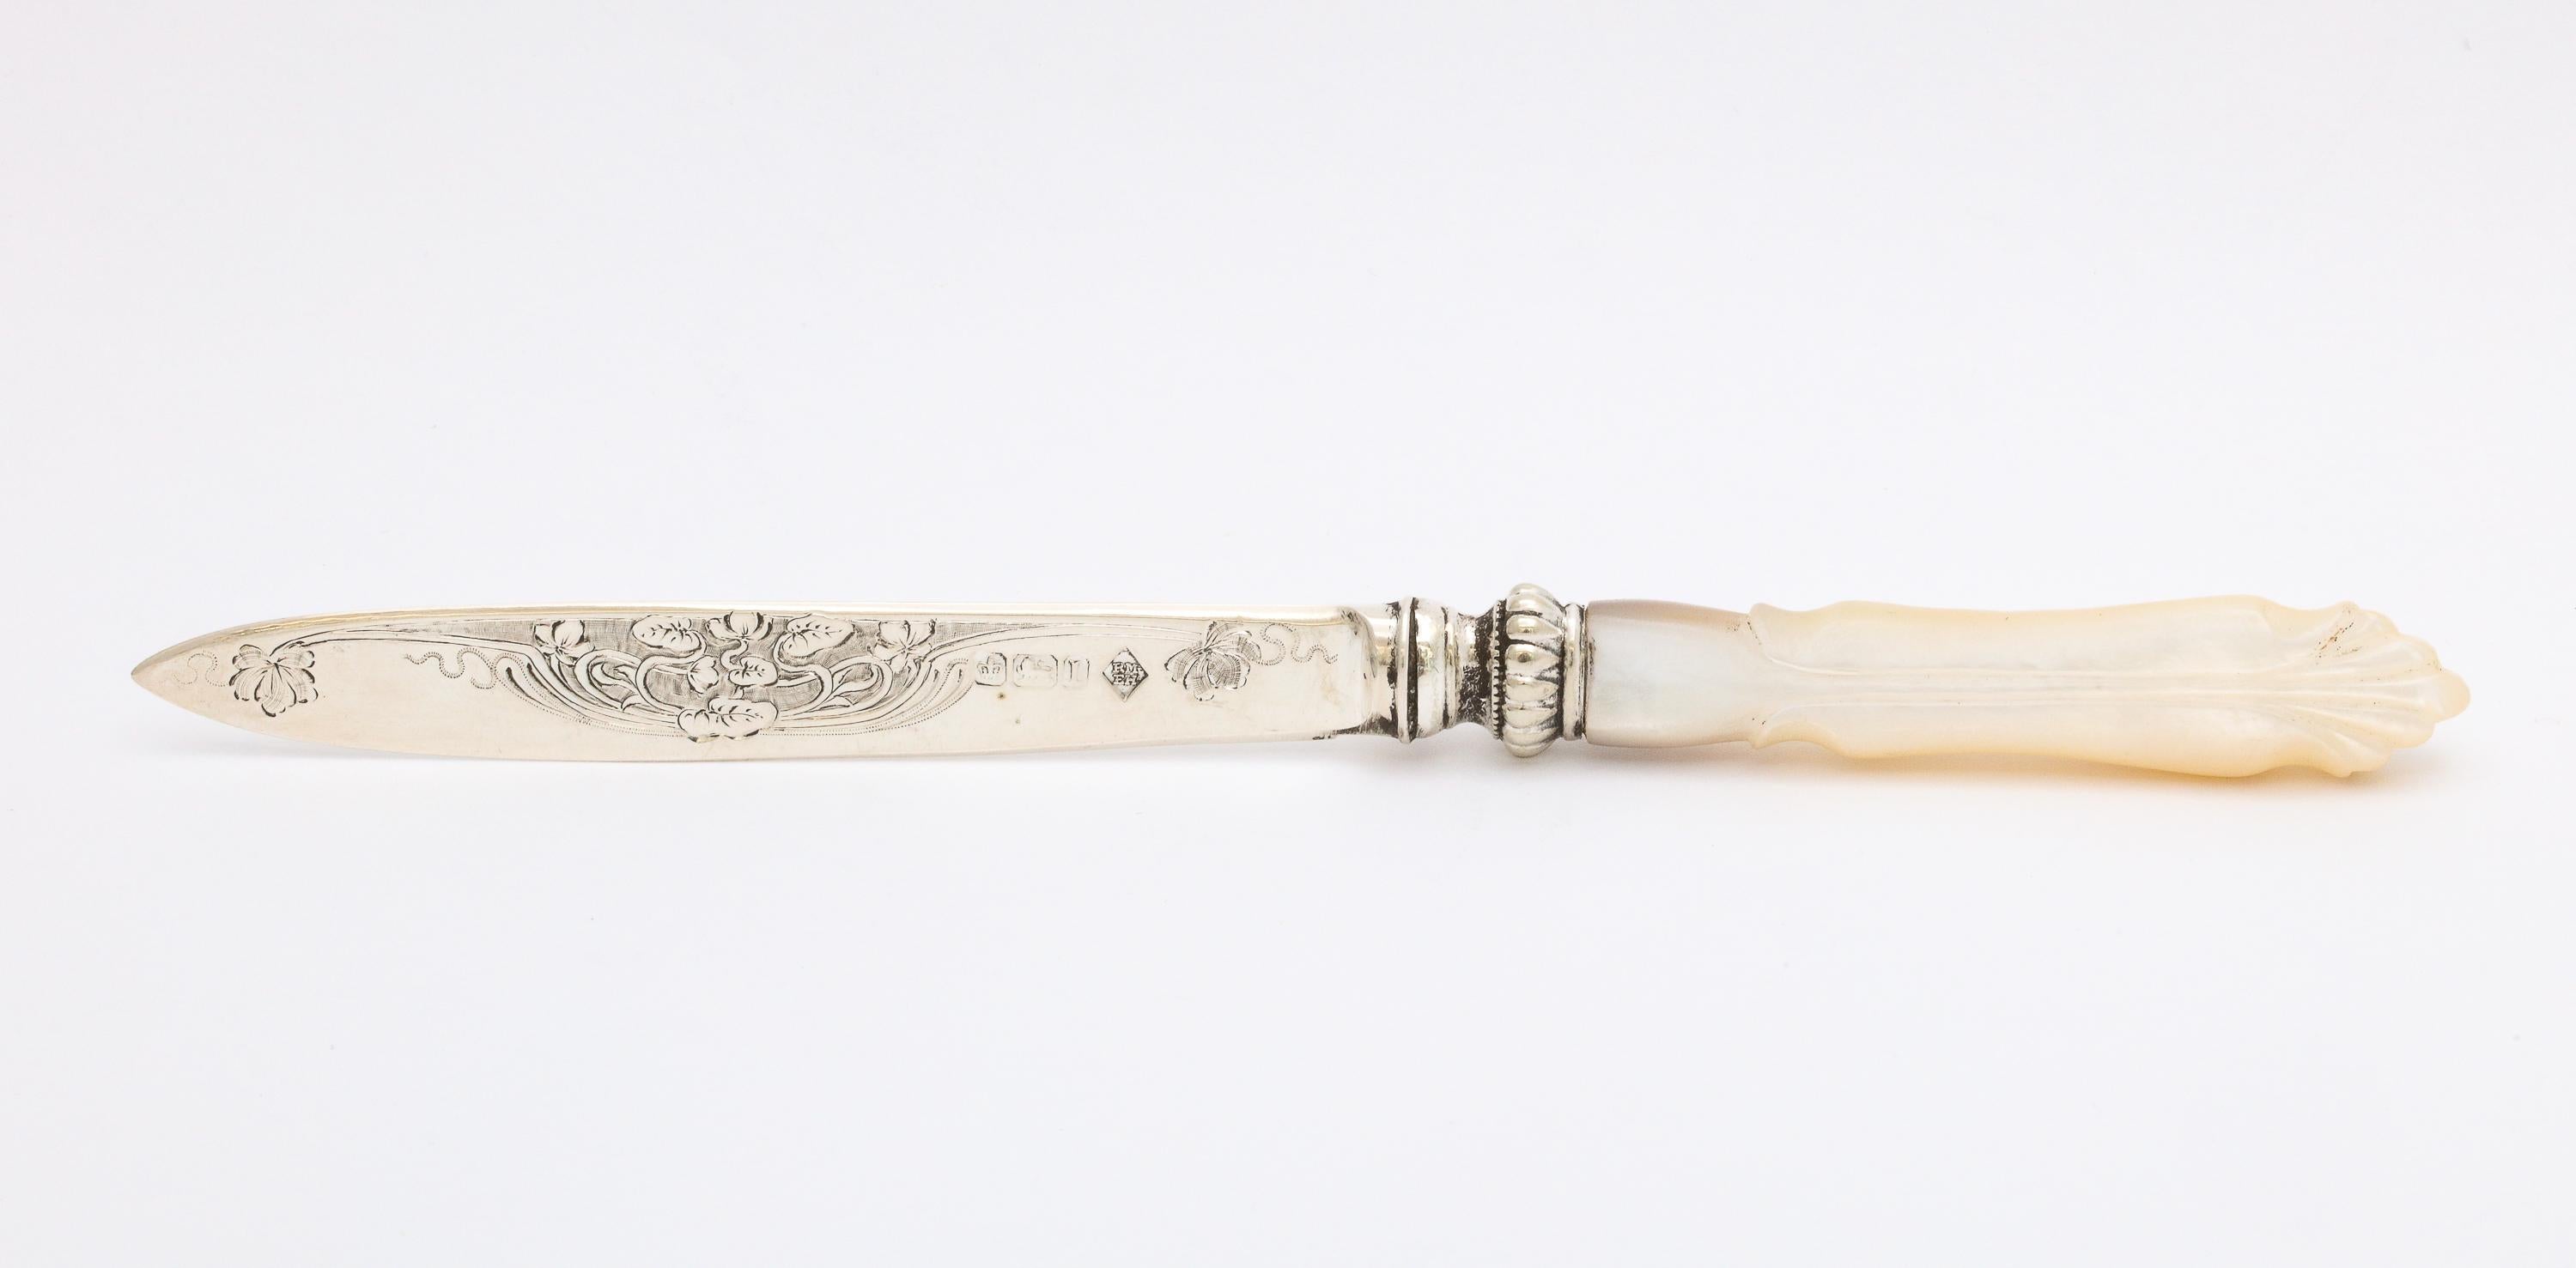 Art Nouveau period, sterling silver and mother-of-pearl letter opener/paper knife, Sheffield, England, year-hallmarked for 1903, Ebenezer and Richard Martin (Martin and Hall) - makers. Measures 7 1/2 inches long x almost 3/4 of an inch wide (at